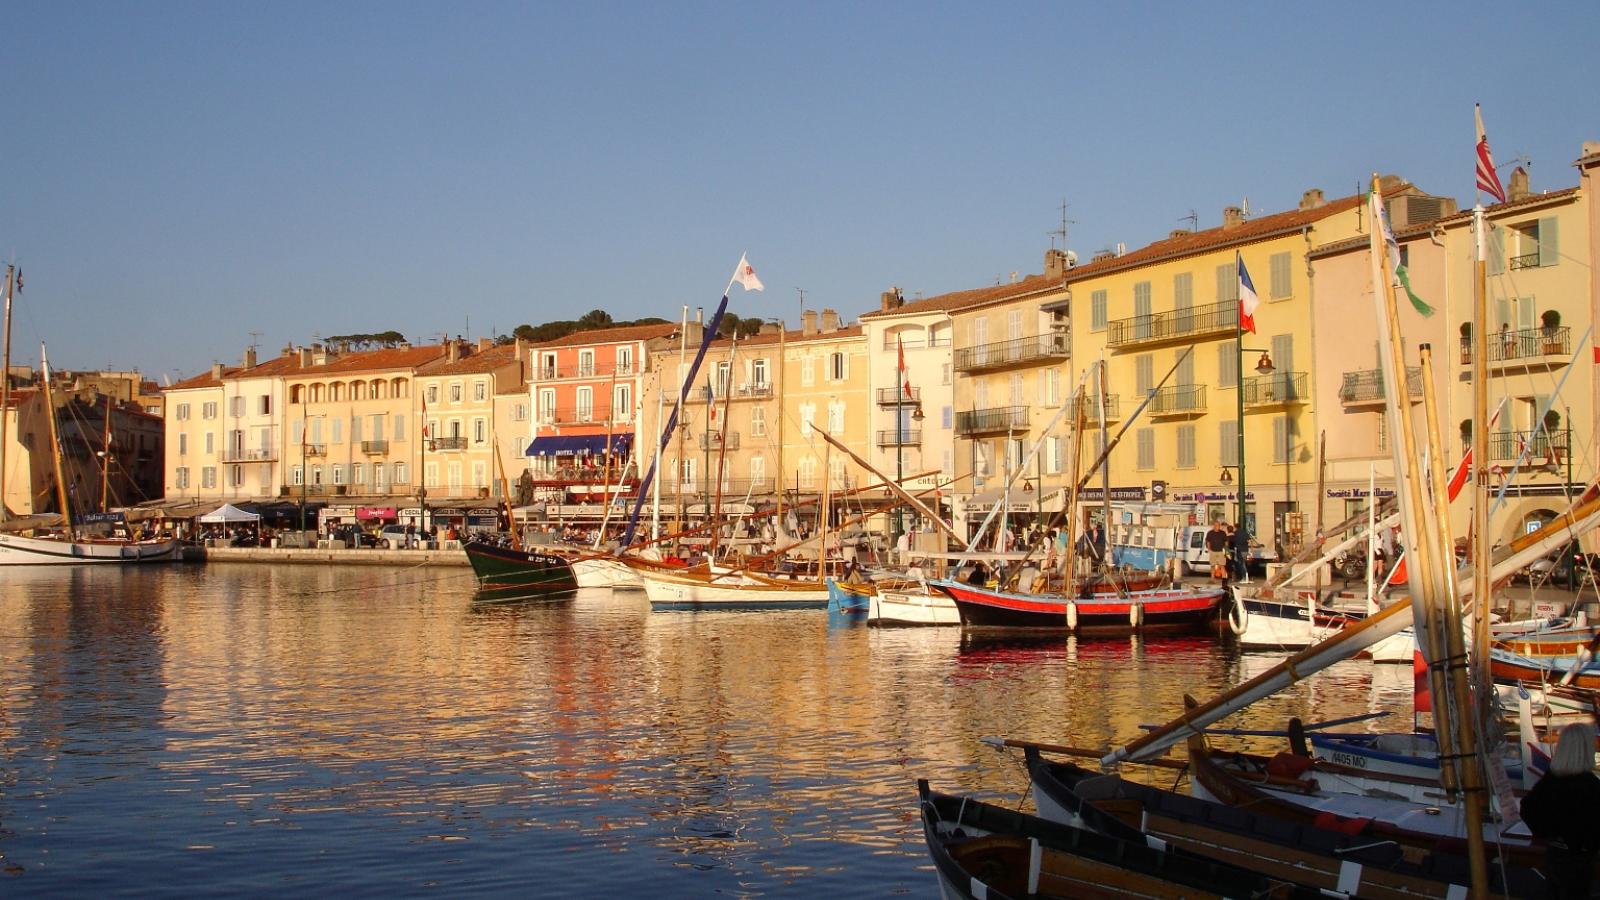 The old port of Saint-Tropez has a story to tell!